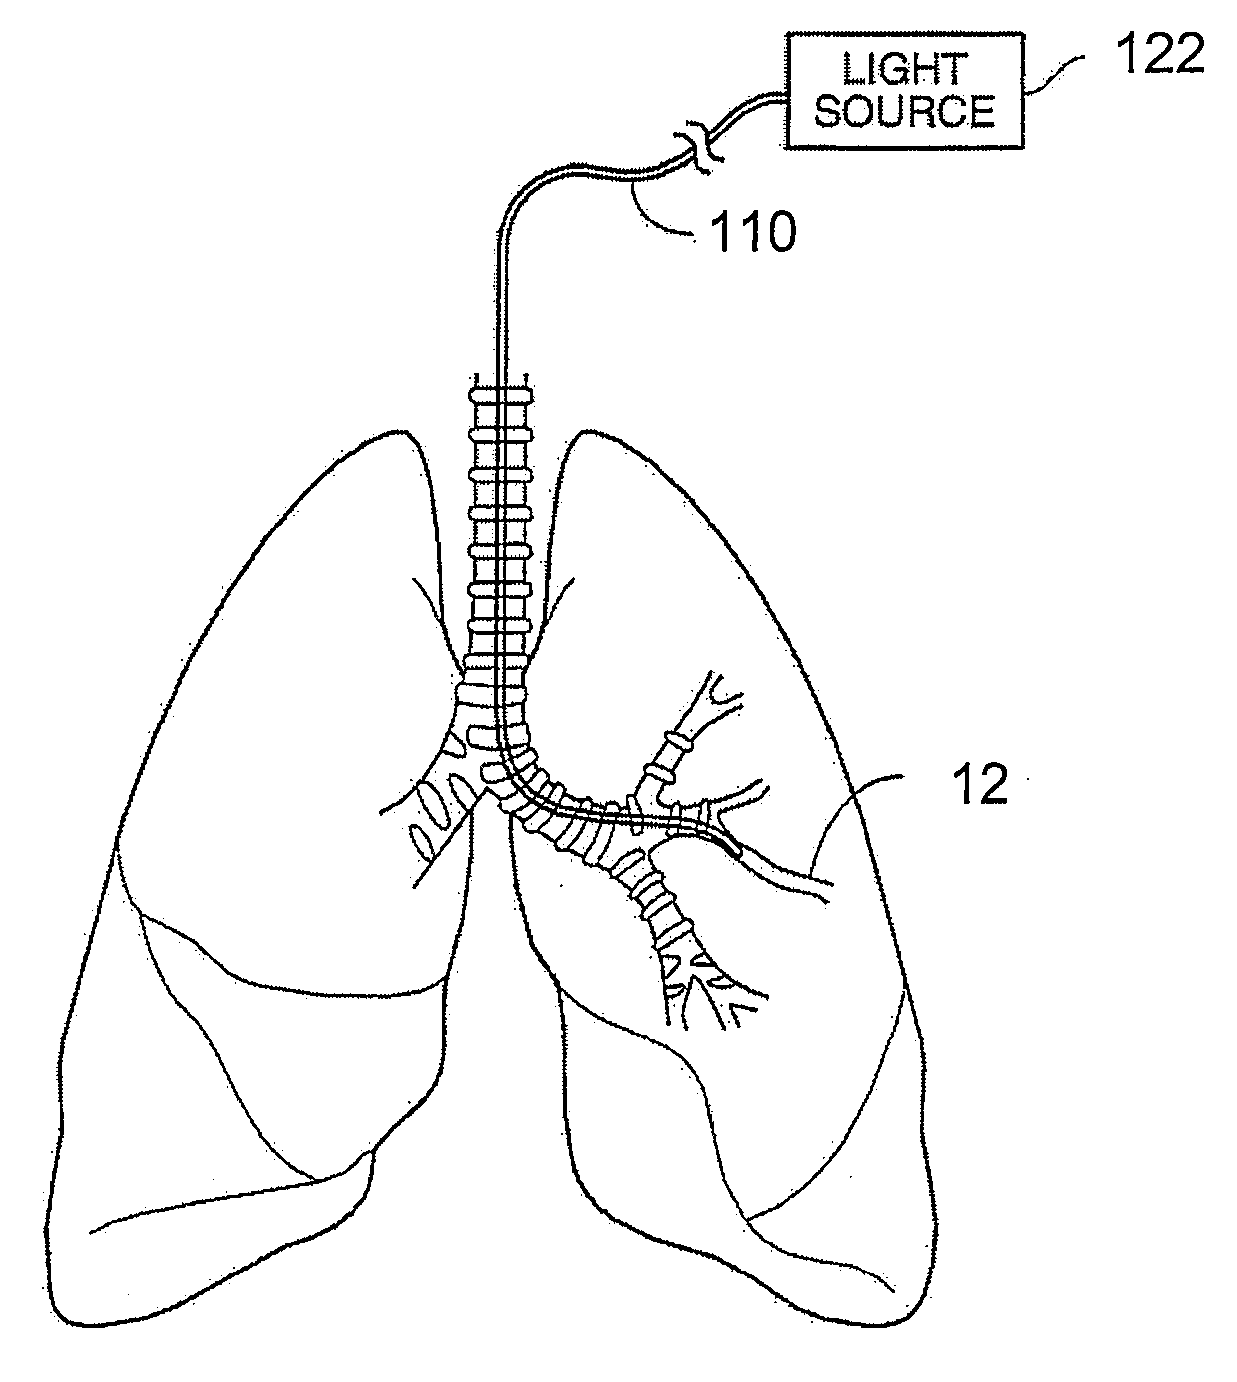 Apparatus for treating airways in the lung